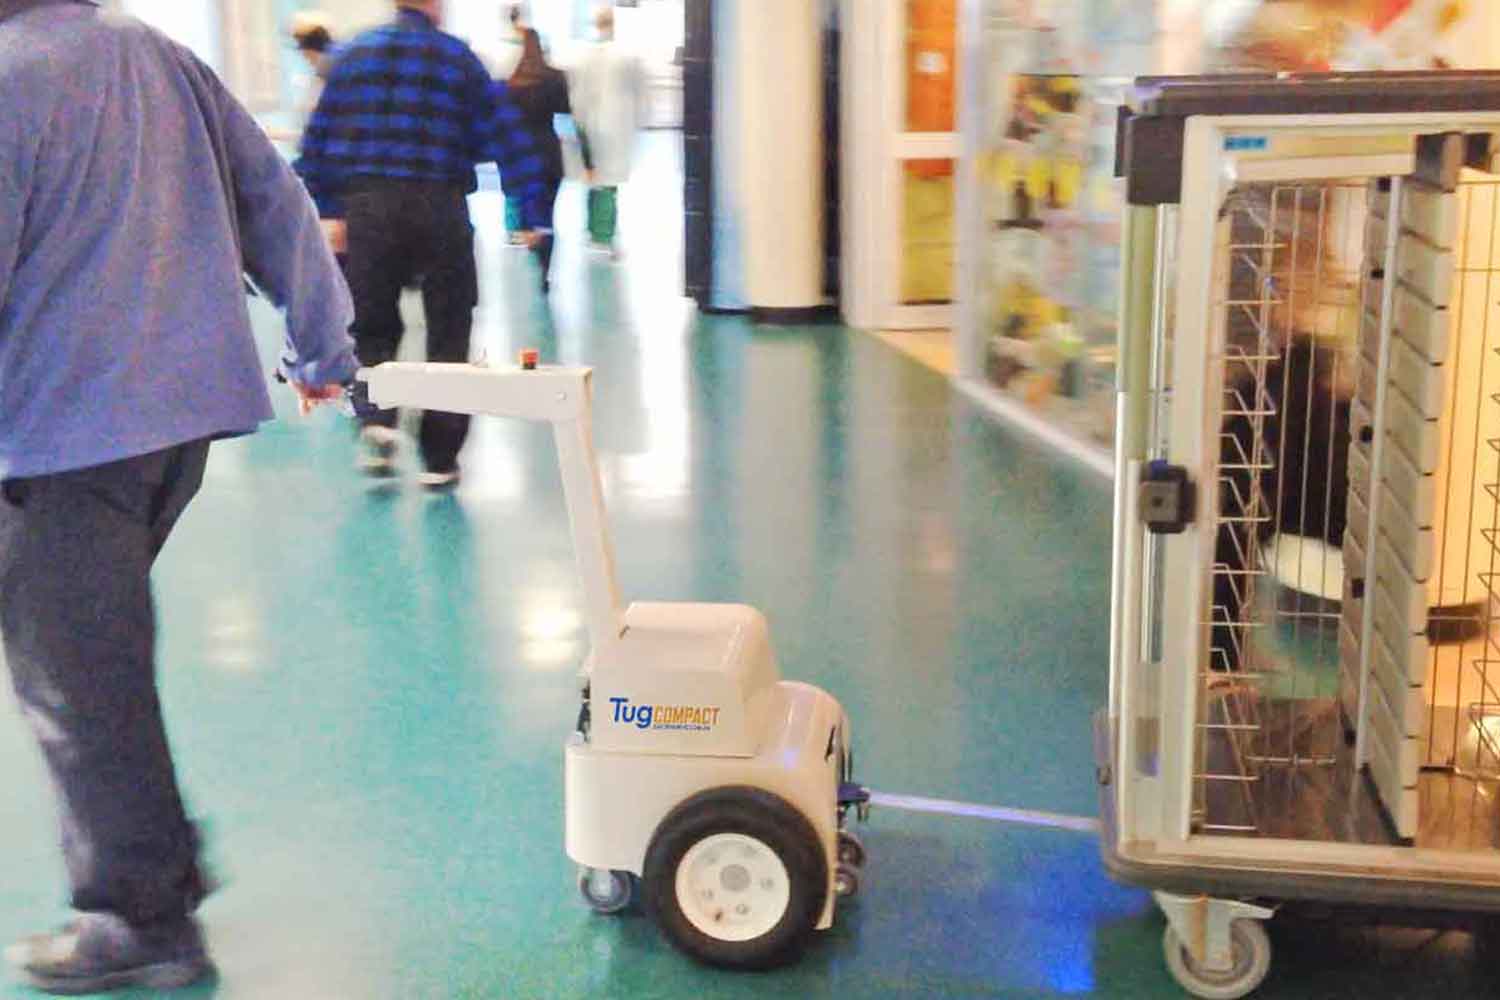 The Tug Compact towing a meal delivery trolley in a hospital